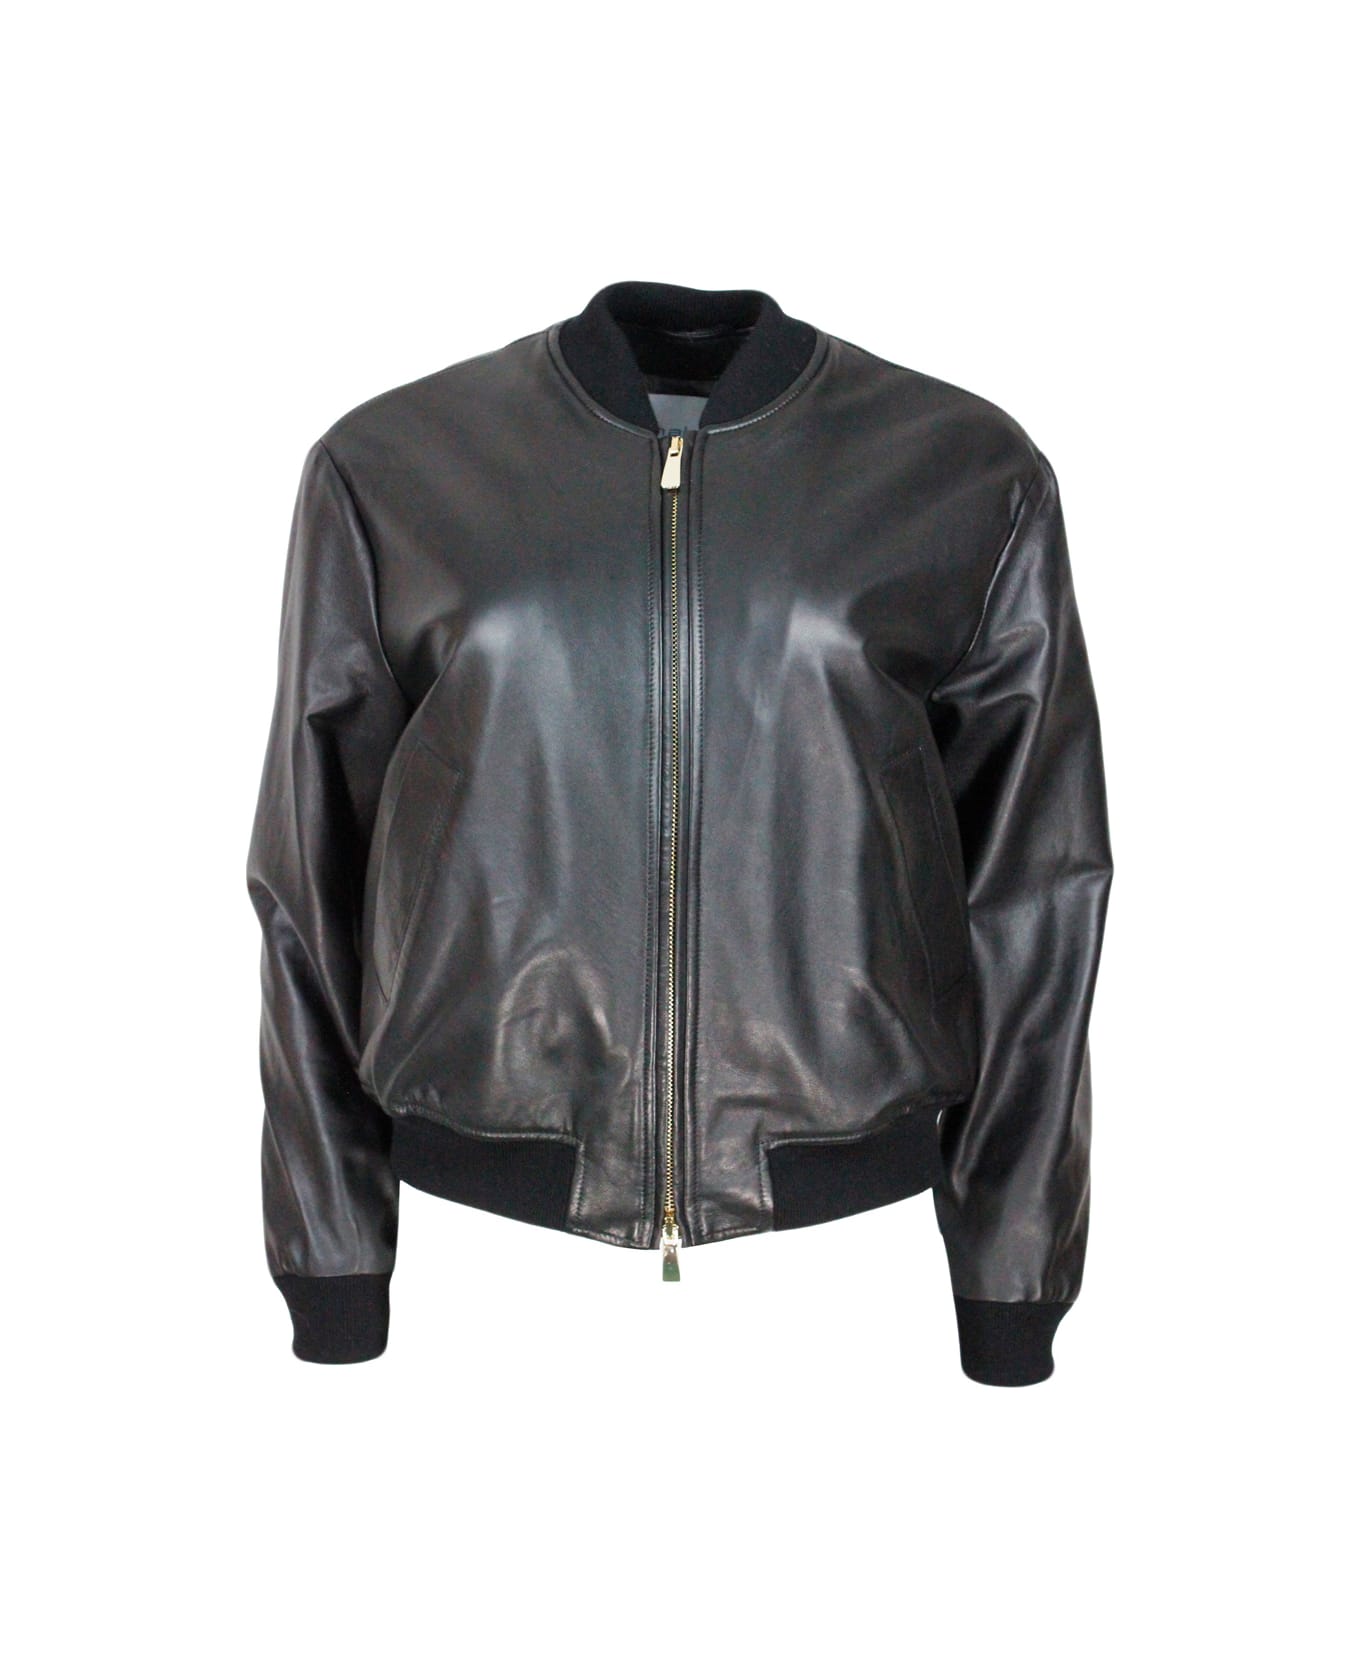 Bomber Jacket With Zip In Soft And Precious Leather With Cashmere Lining.  Knitted Collar, Cuffs And Bottom Hem